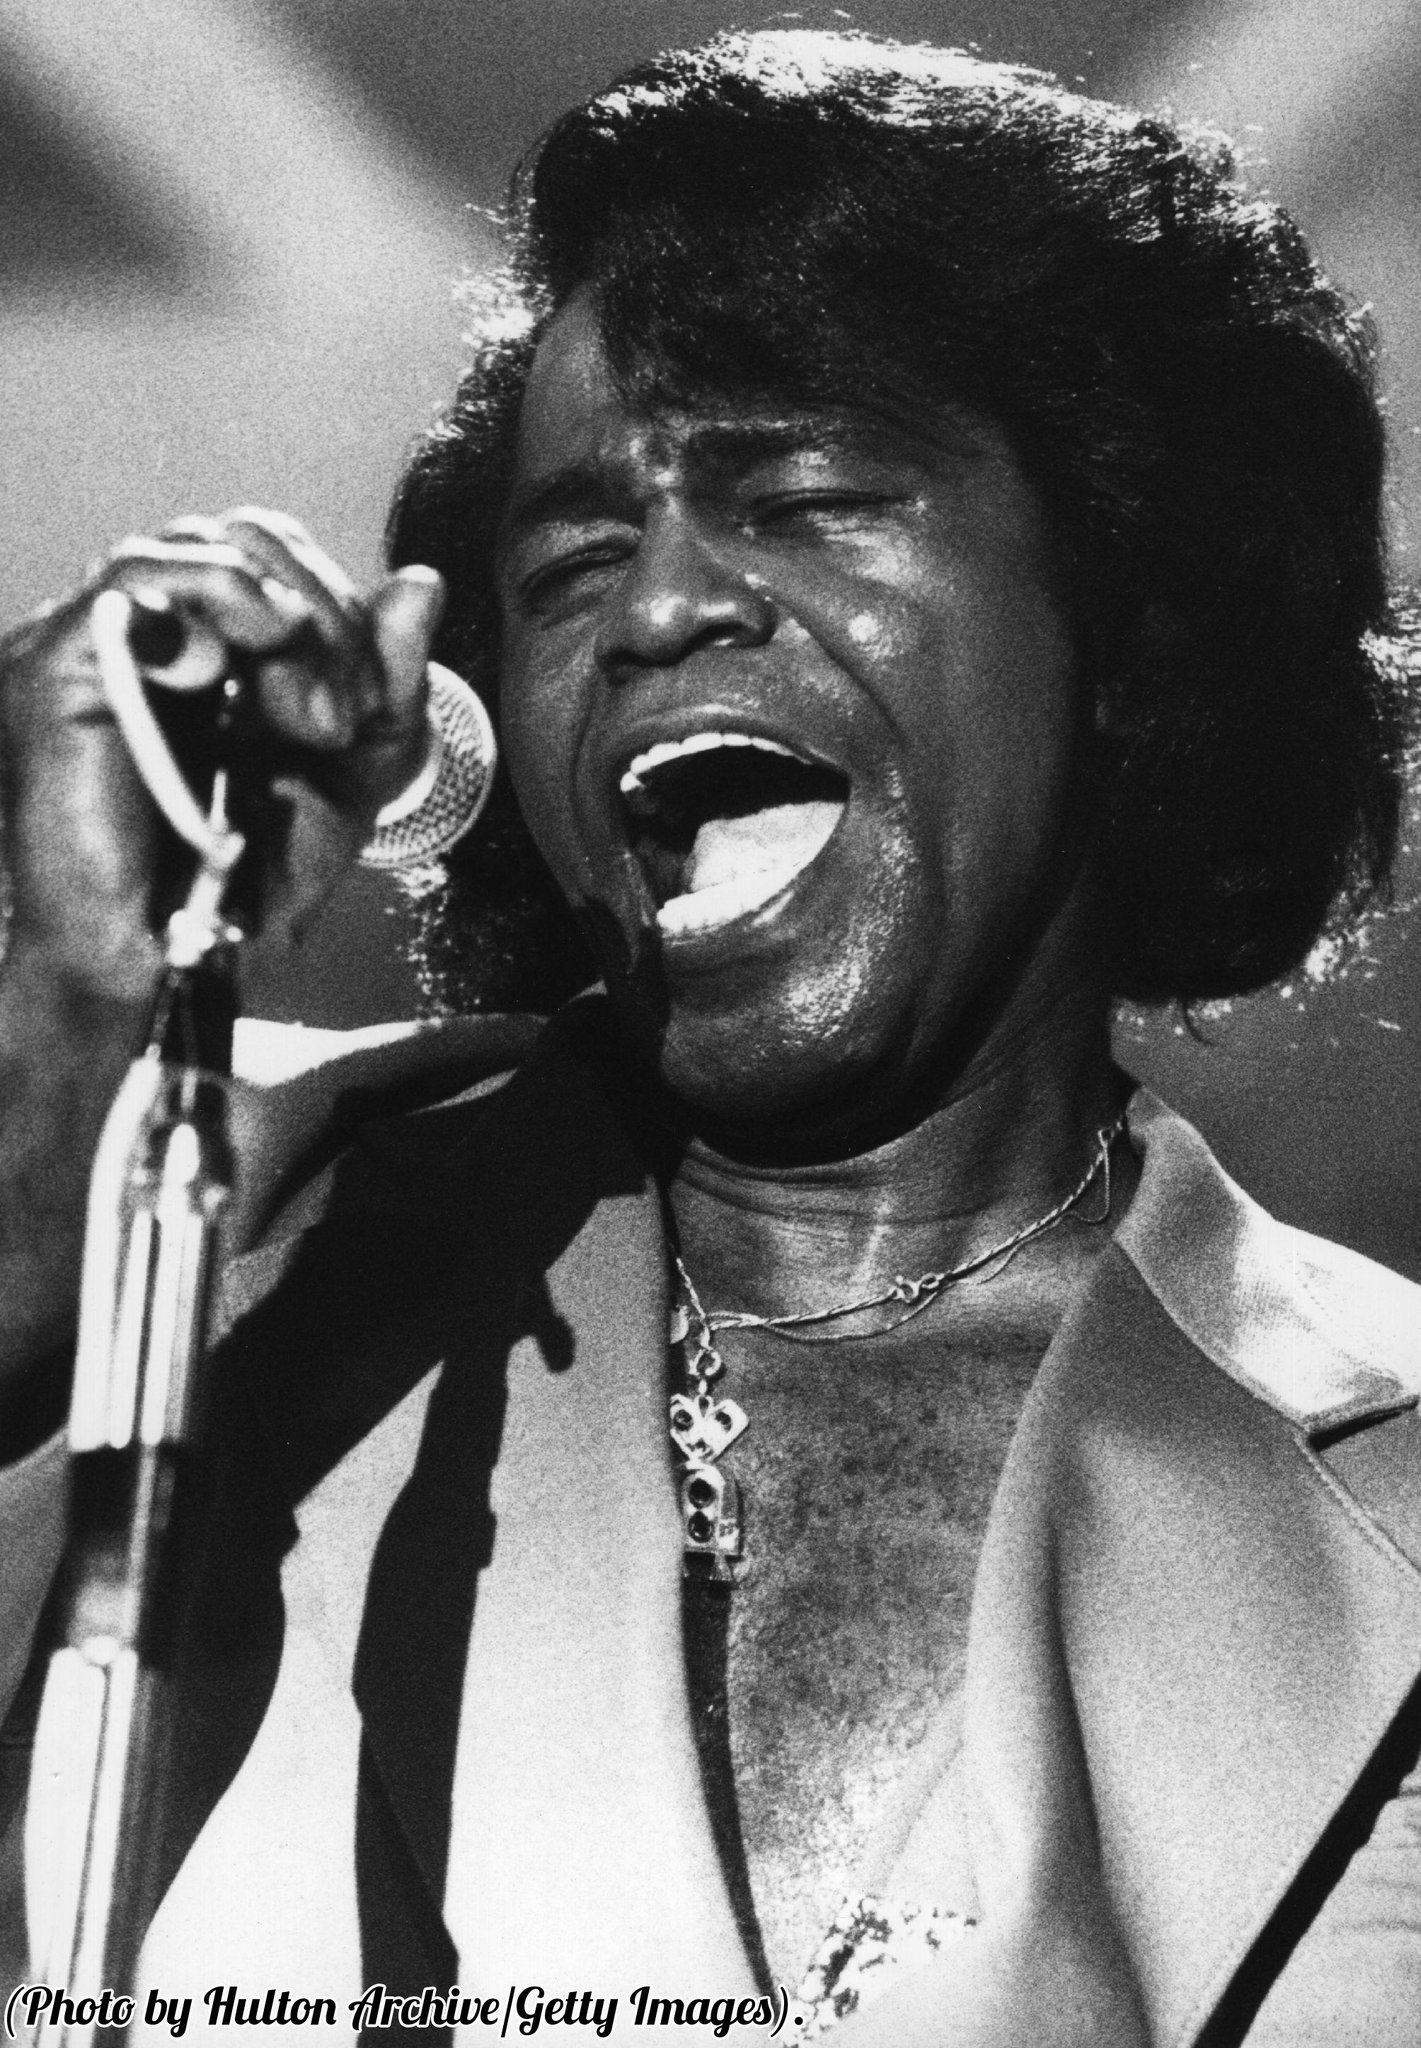 Happy Birthday to the late, great Godfather of Soul, James Brown. 